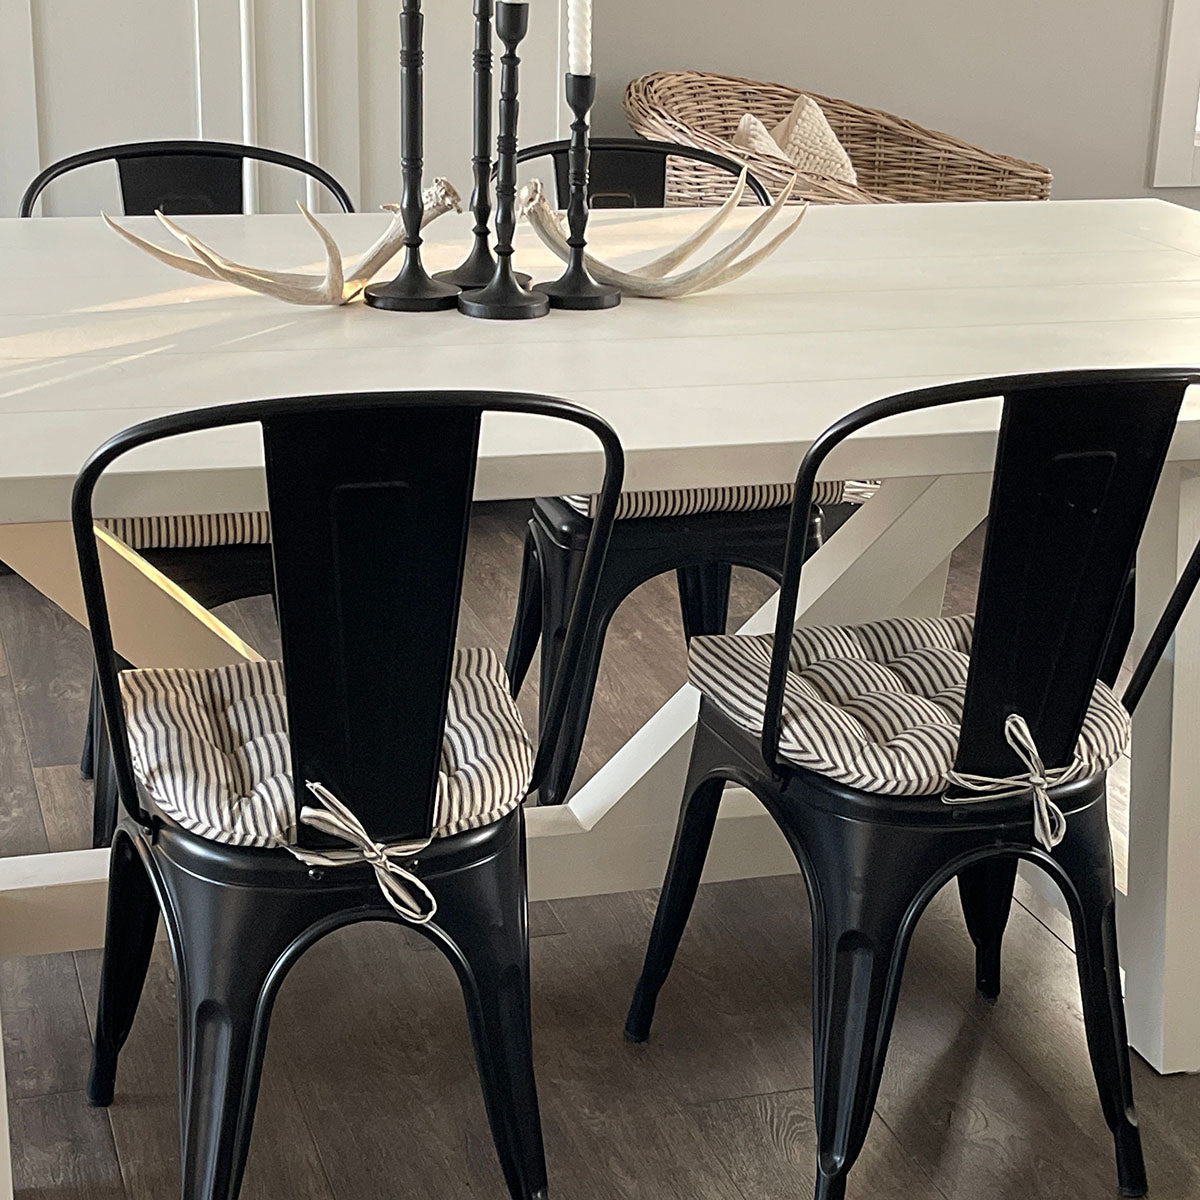 metal chair cushions on black tolix chairs at a farmhouse table